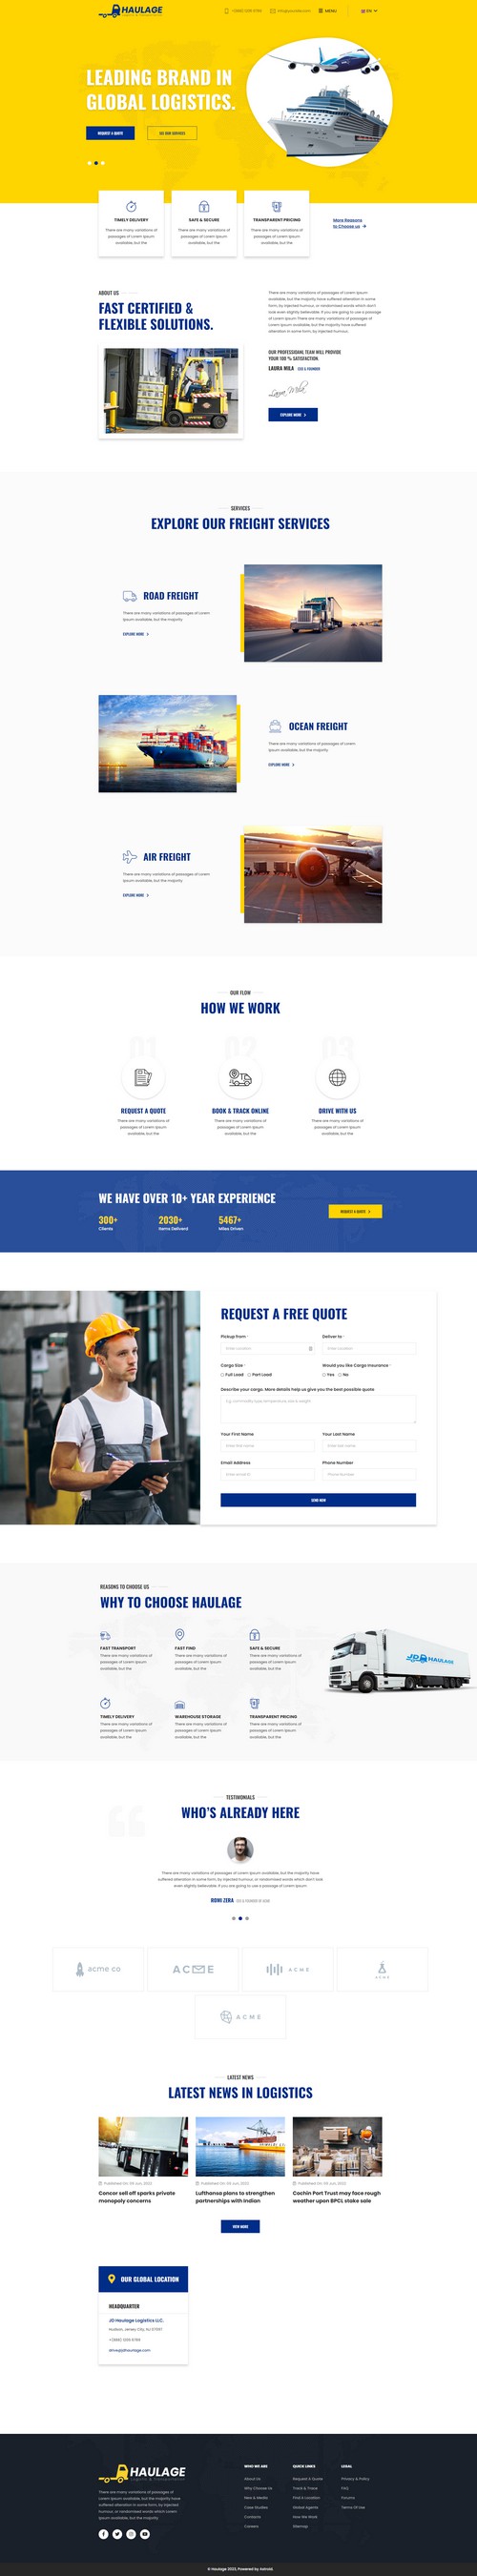 Haulage - Joomla 4 Template for Logistic and Transportation Services